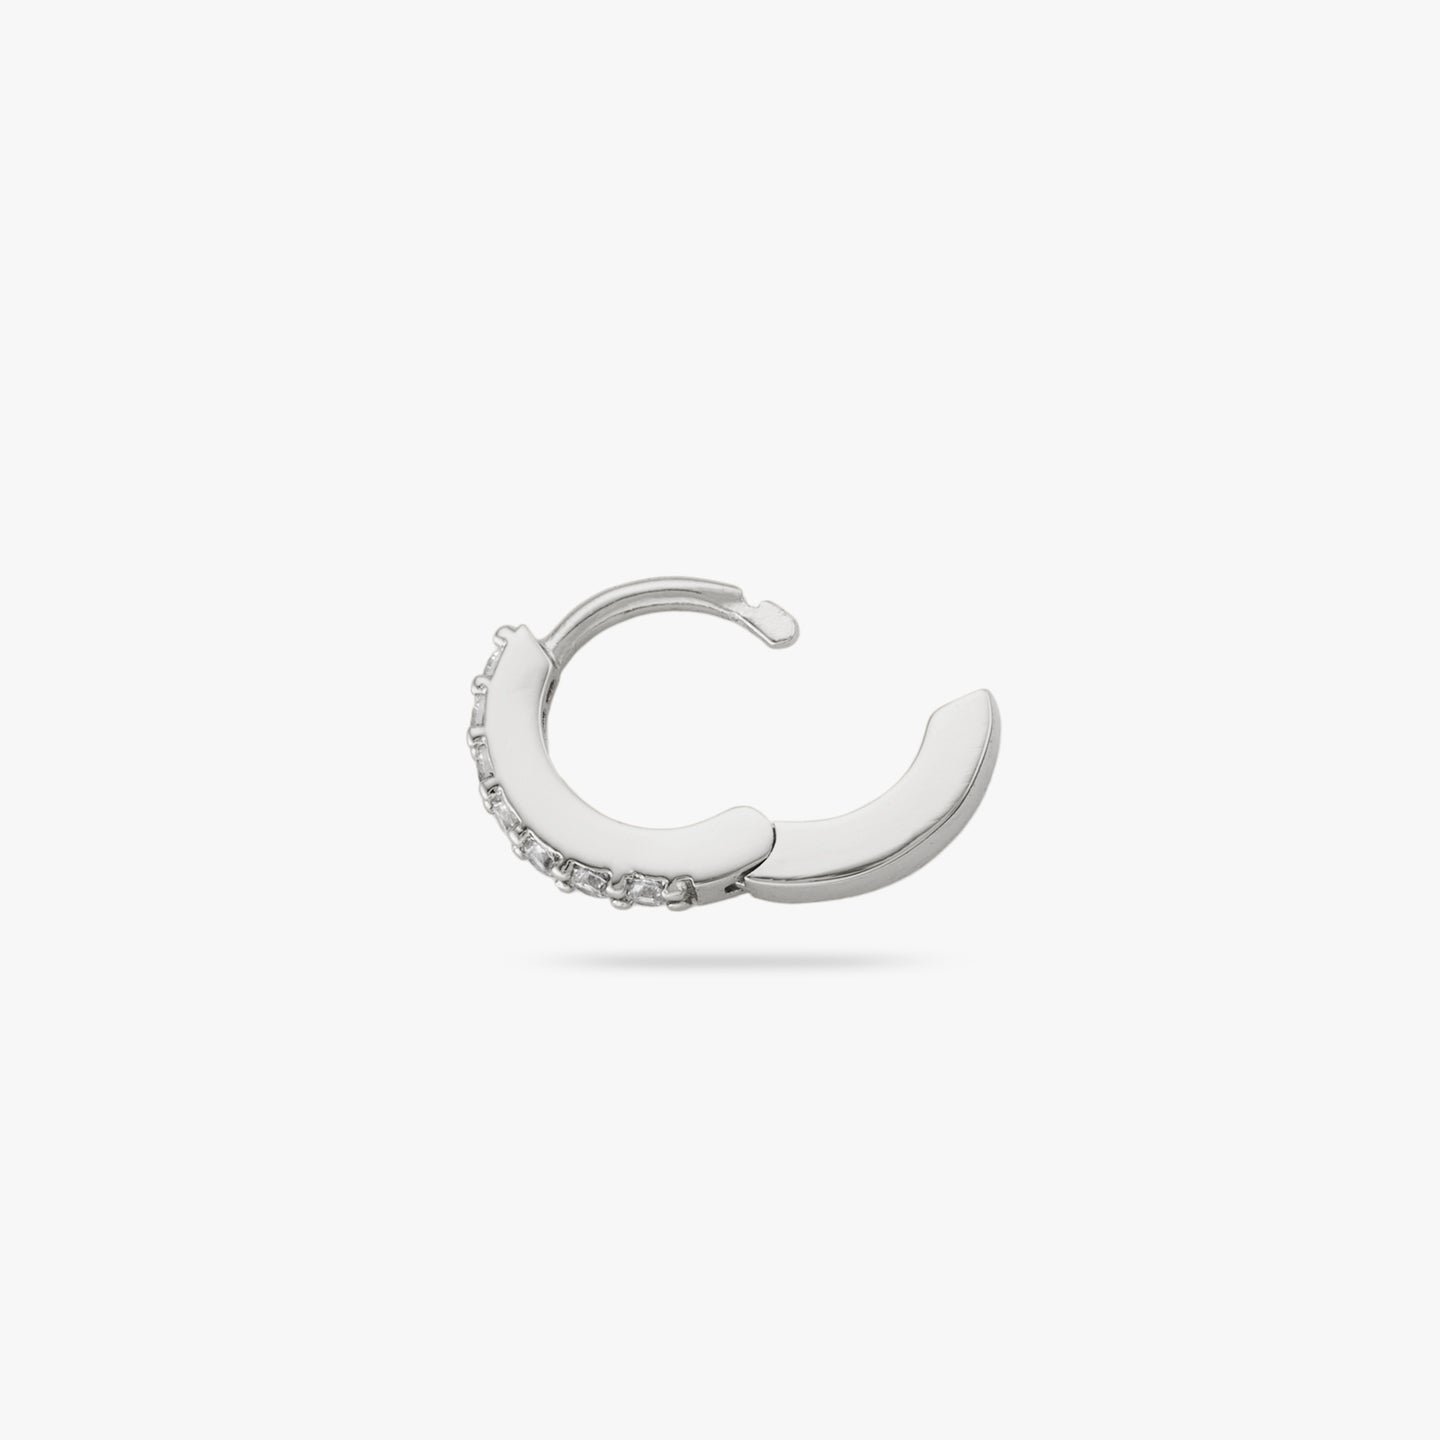 A silver/clear micro pave huggie with a 6mm inner diameter and the clasp is undone color:null|silver/clear